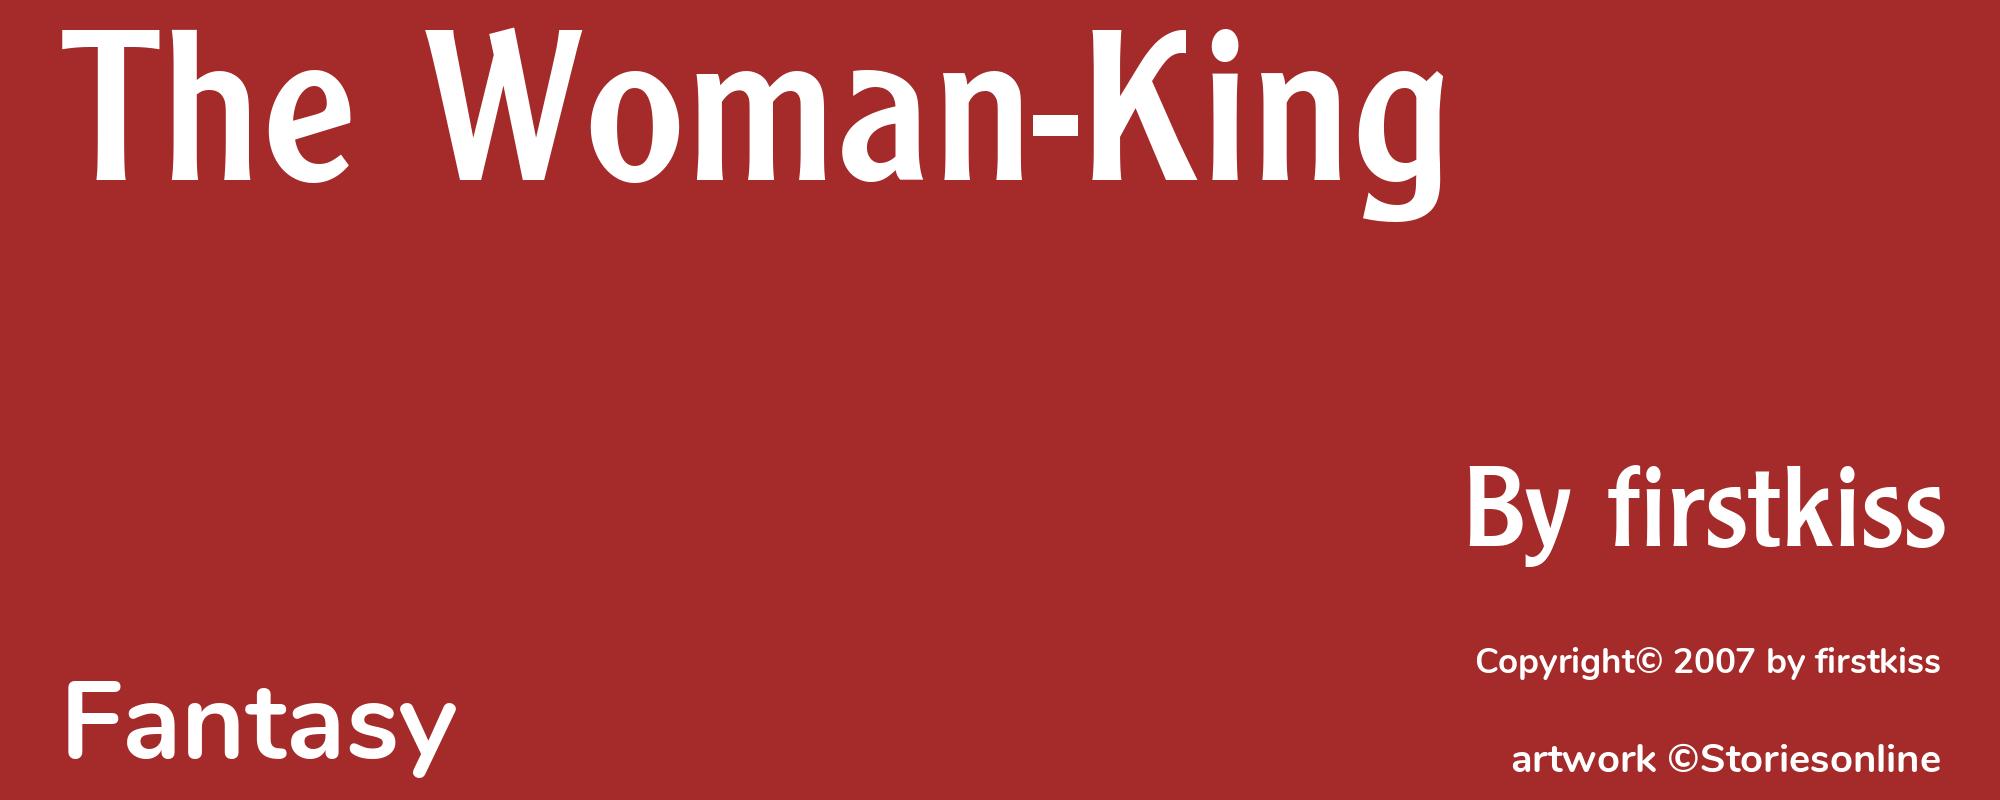 The Woman-King - Cover